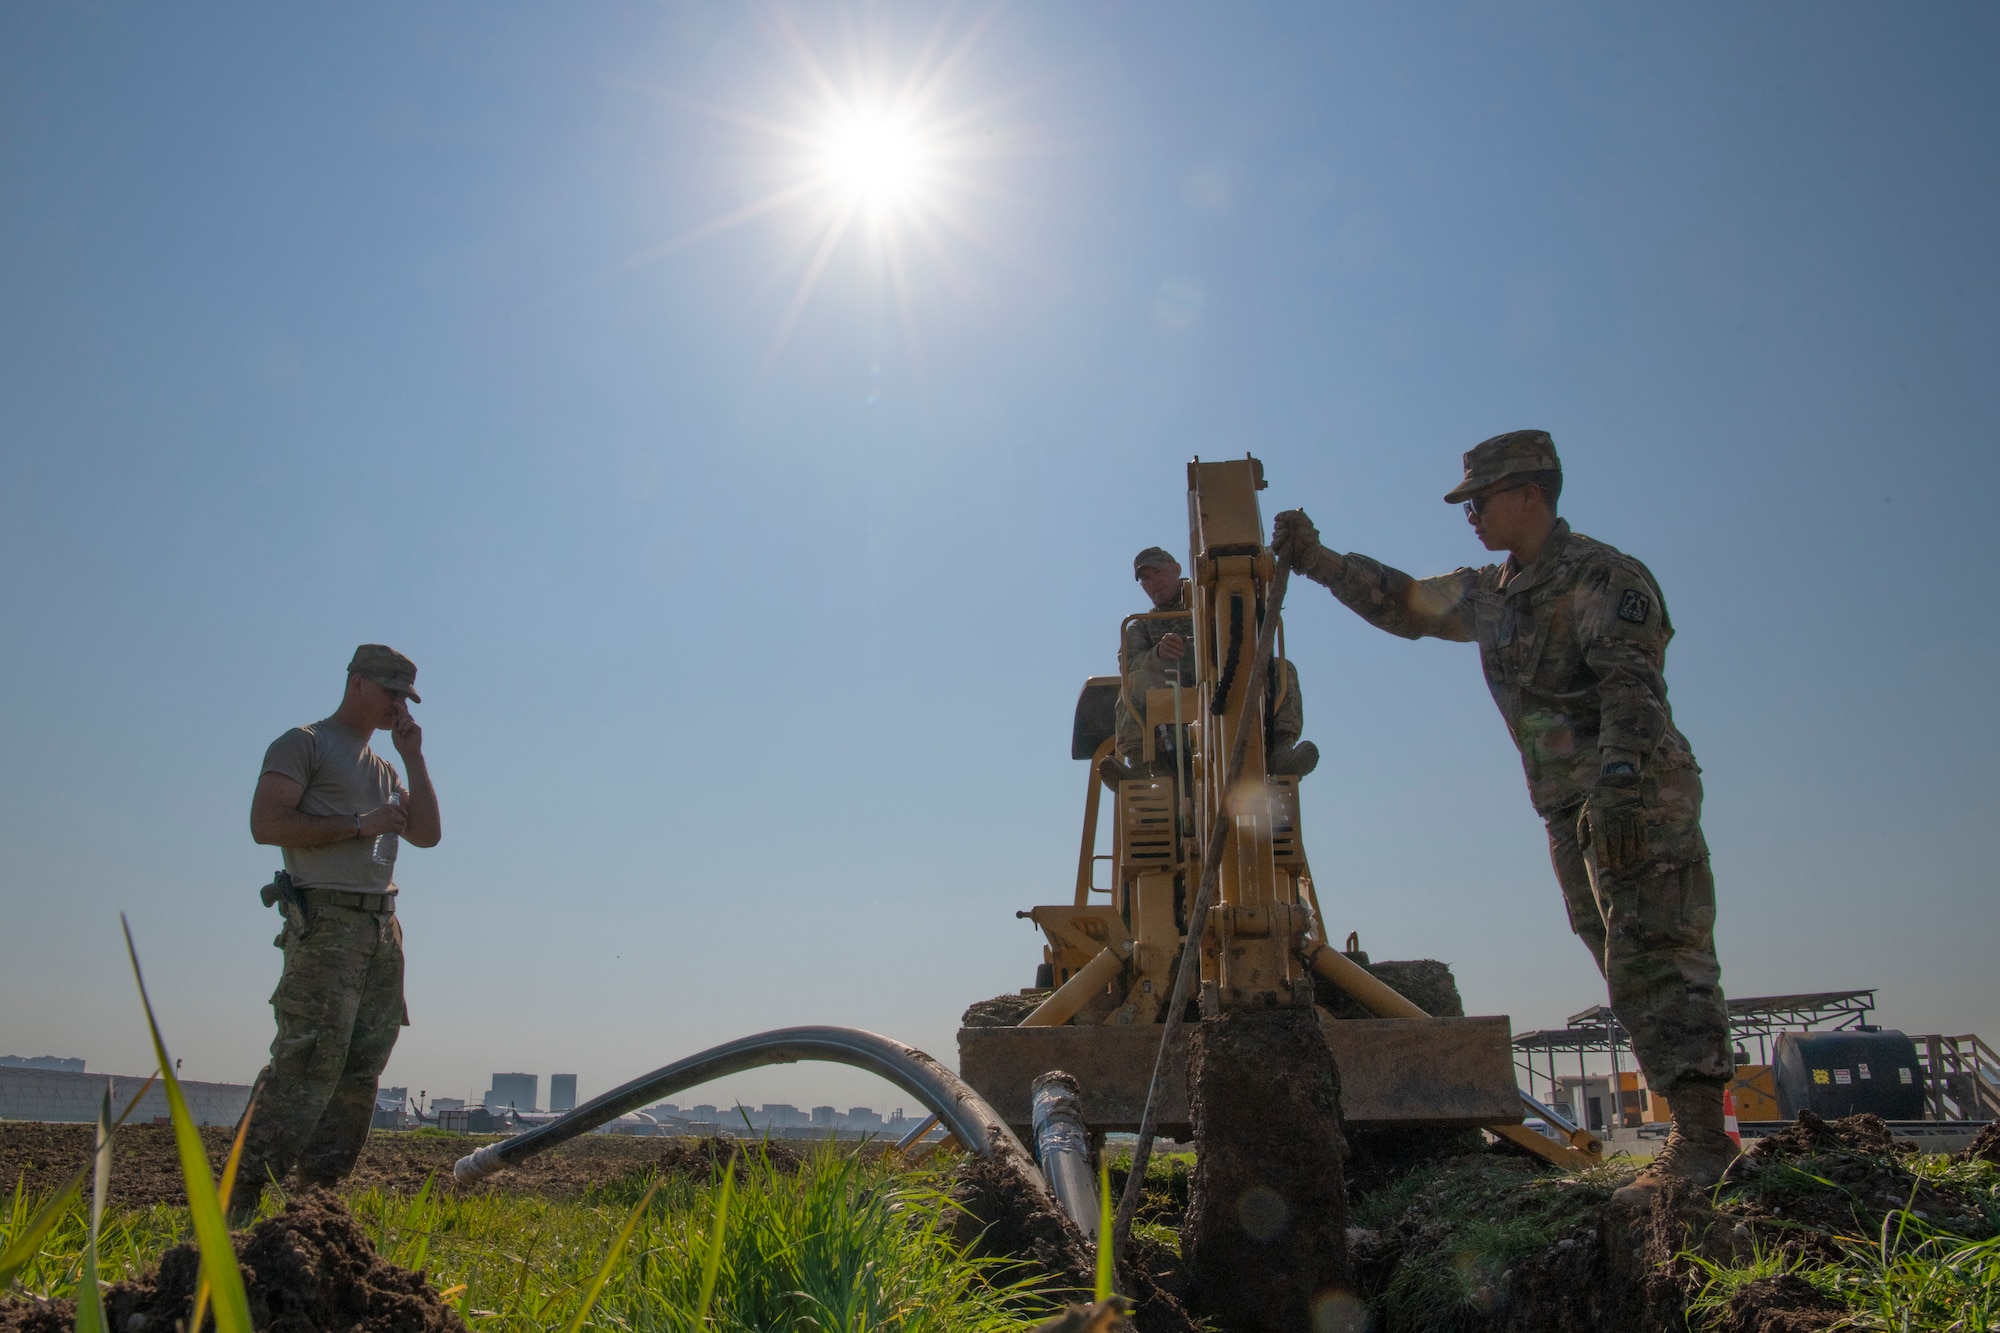 387 AES JET/IA Airmen Provide Contracting, E&I Support in Iraq